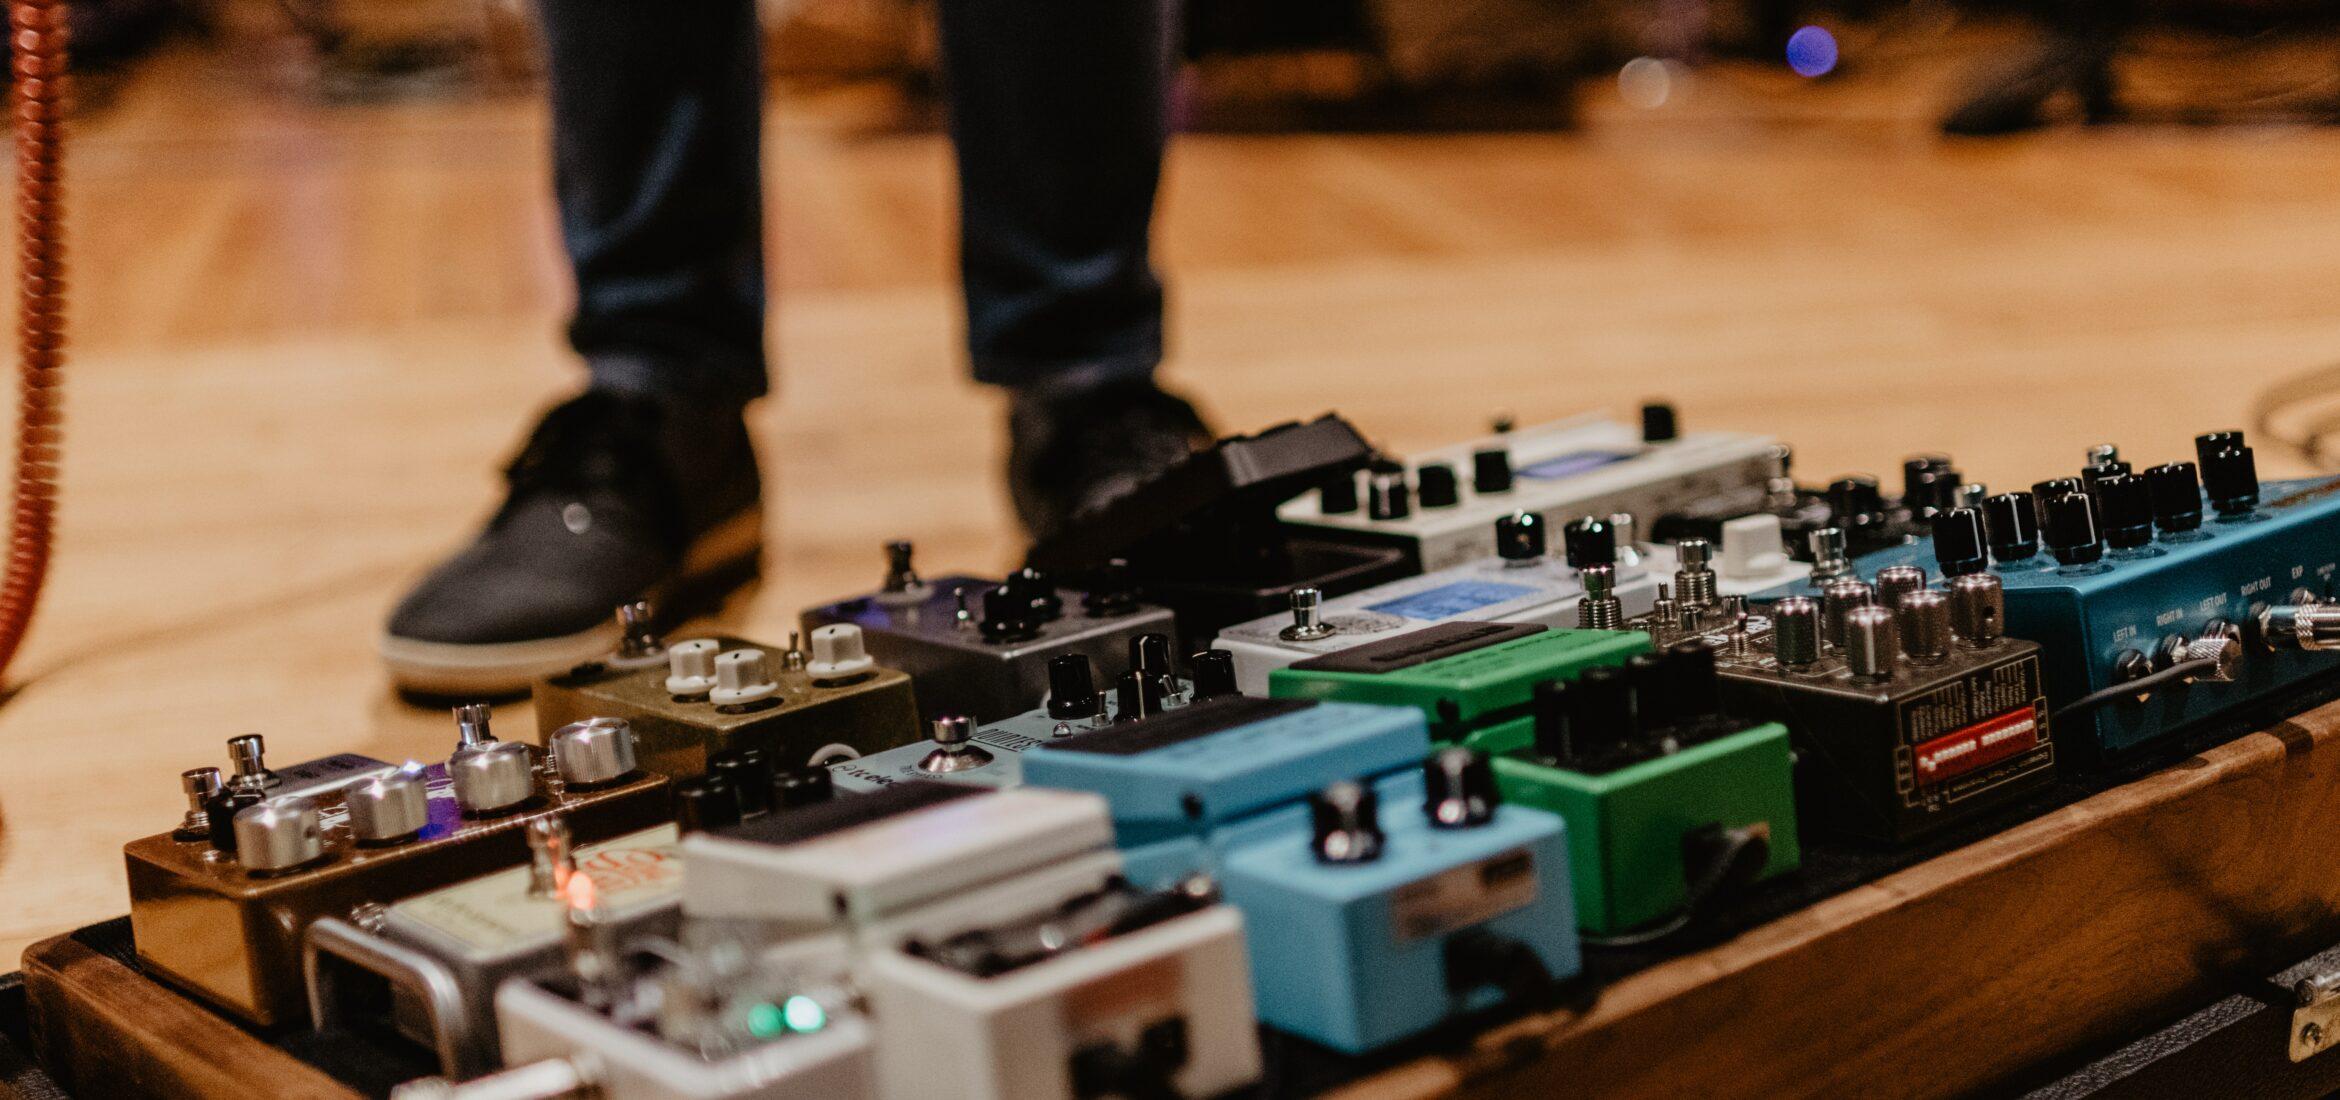 Chorus, Flanger and Phaser Effects, Explained